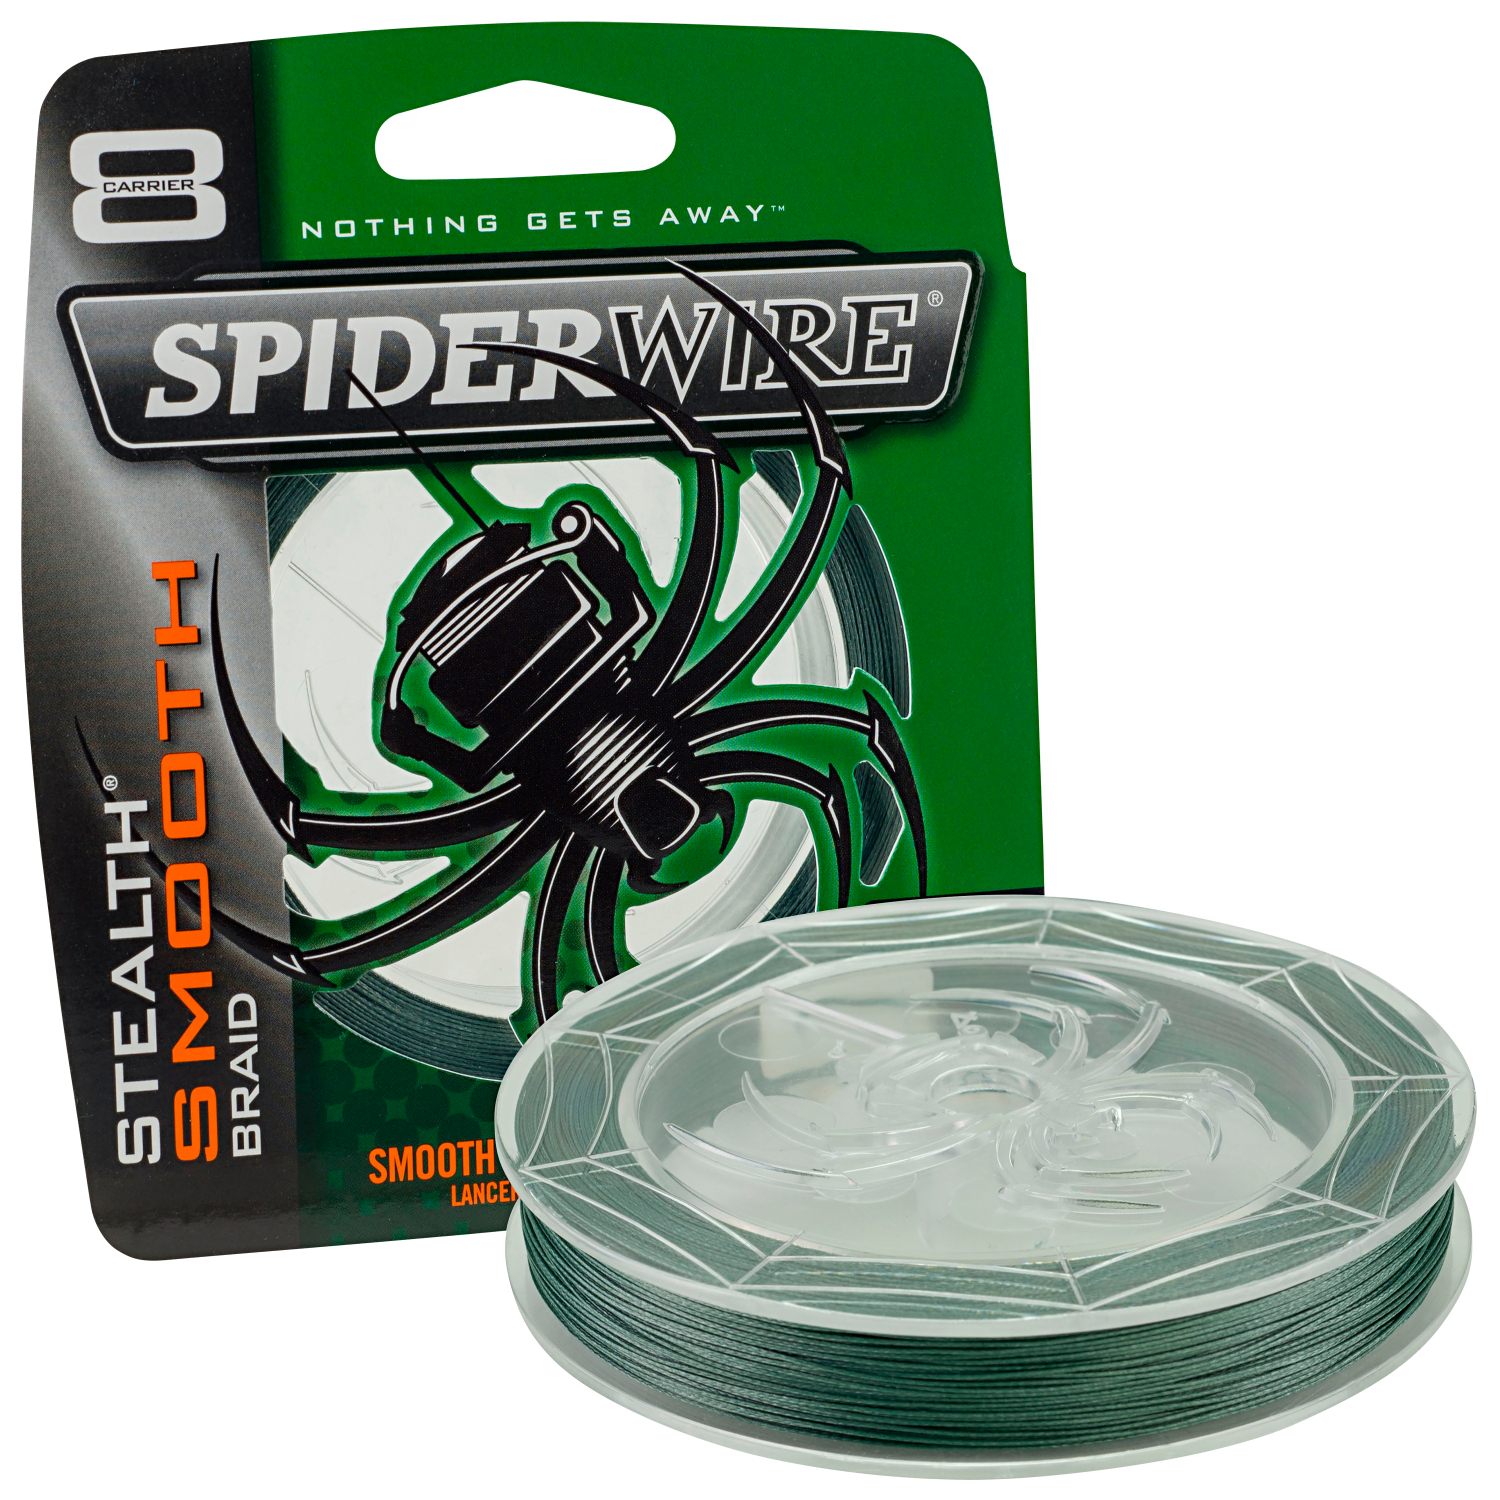 Spiderwire Spiderwire Fishing Line Stealth Smooth 8 (Moss Green) 